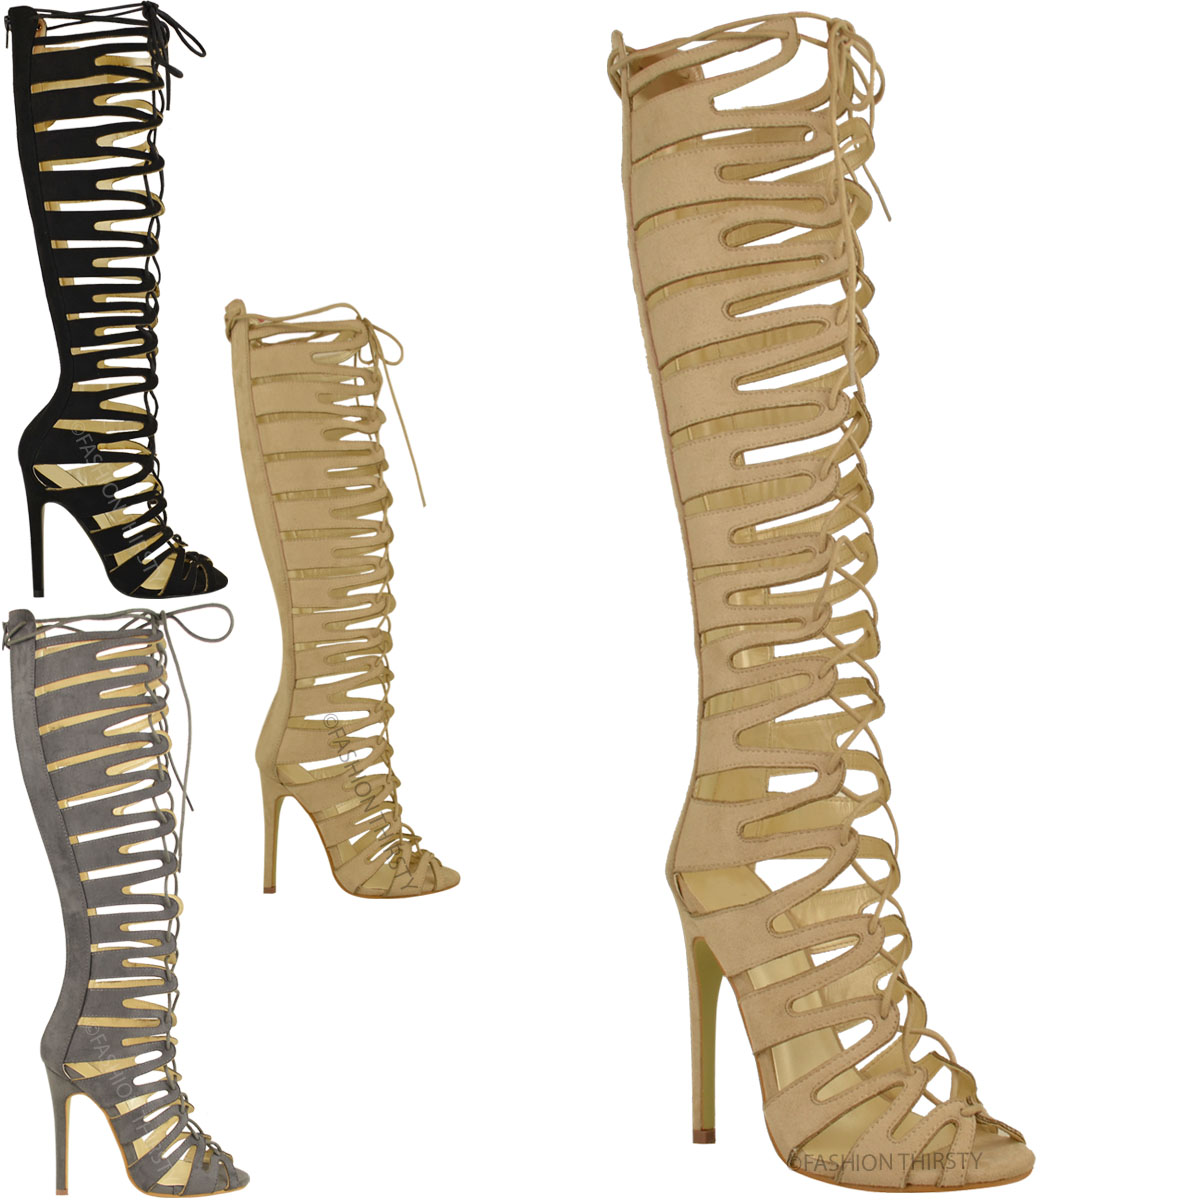 Details about   Peep Toe High Stiletto Heel Lace Up Over Knee Boots Nubuck Gladiator Women Shoes 